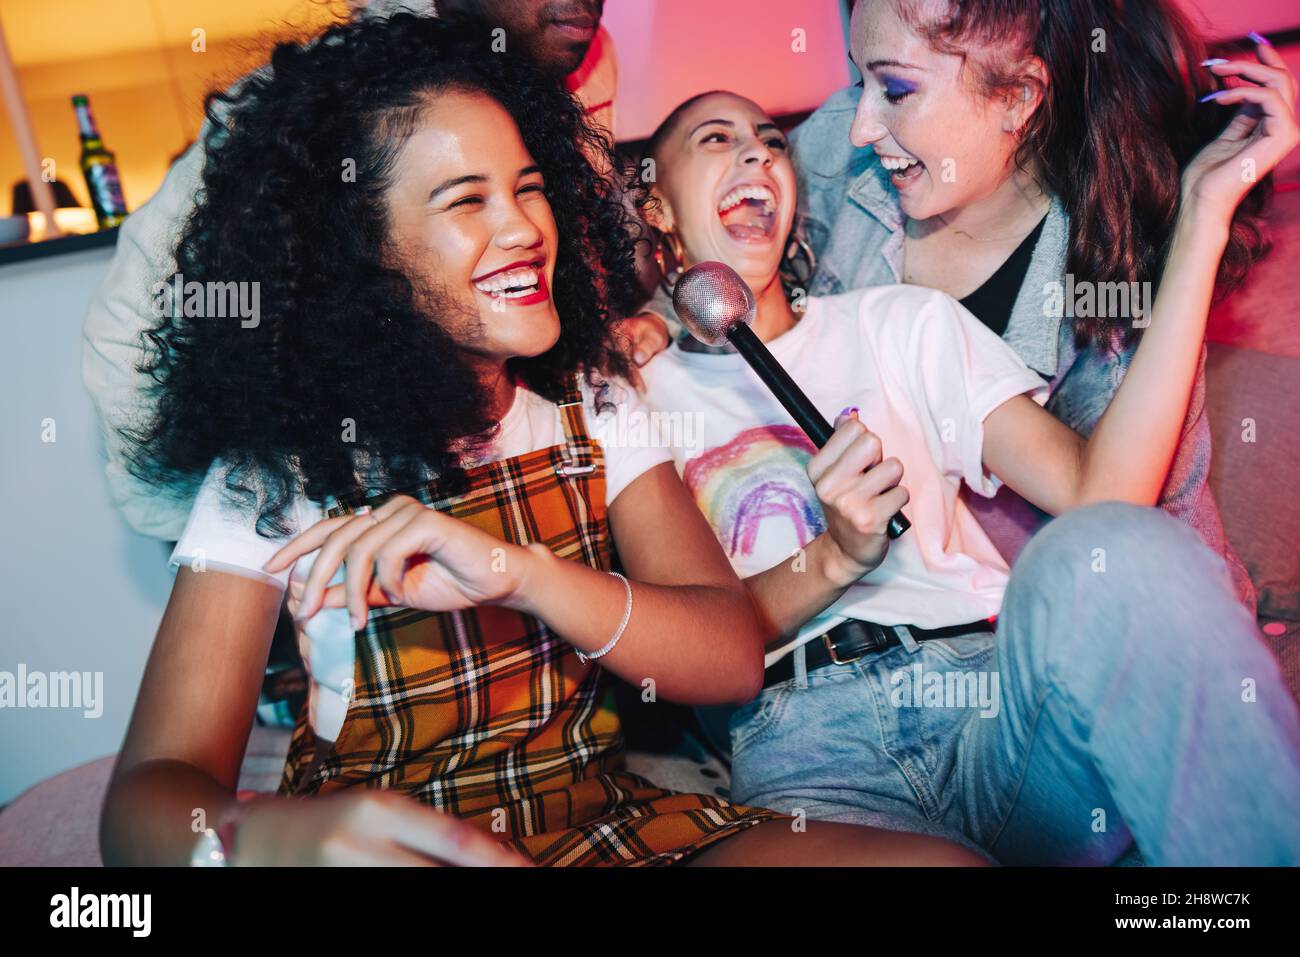 Karaoke happiness. Cheerful friends enjoying singing their favourite songs during karaoke night. Group of multicultural friends laughing and having a Stock Photo